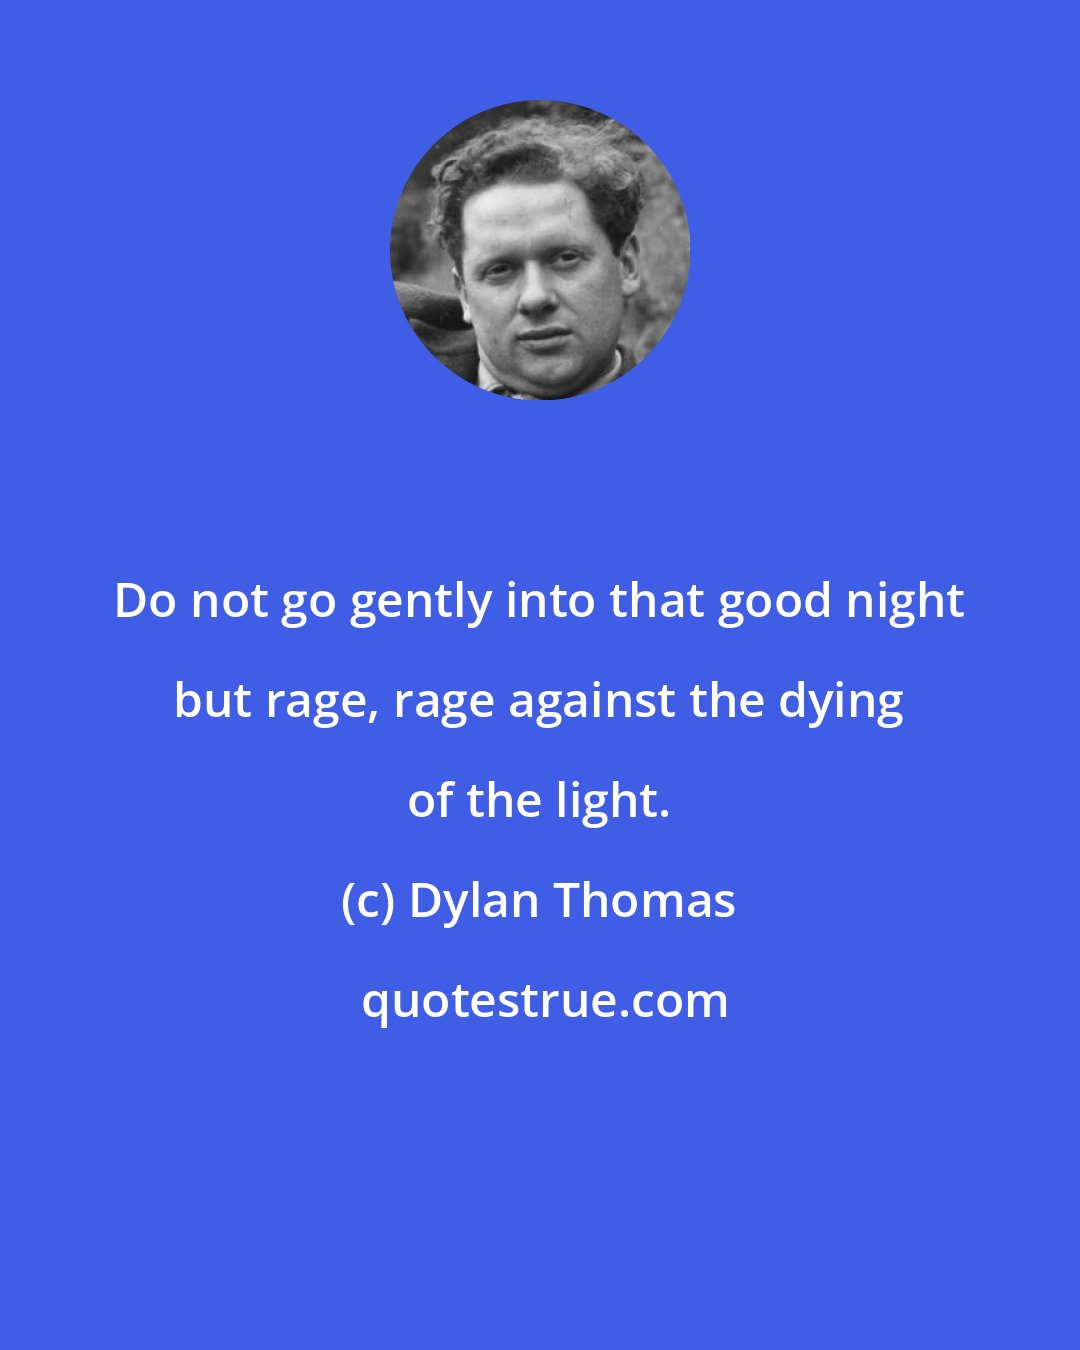 Dylan Thomas: Do not go gently into that good night but rage, rage against the dying of the light.